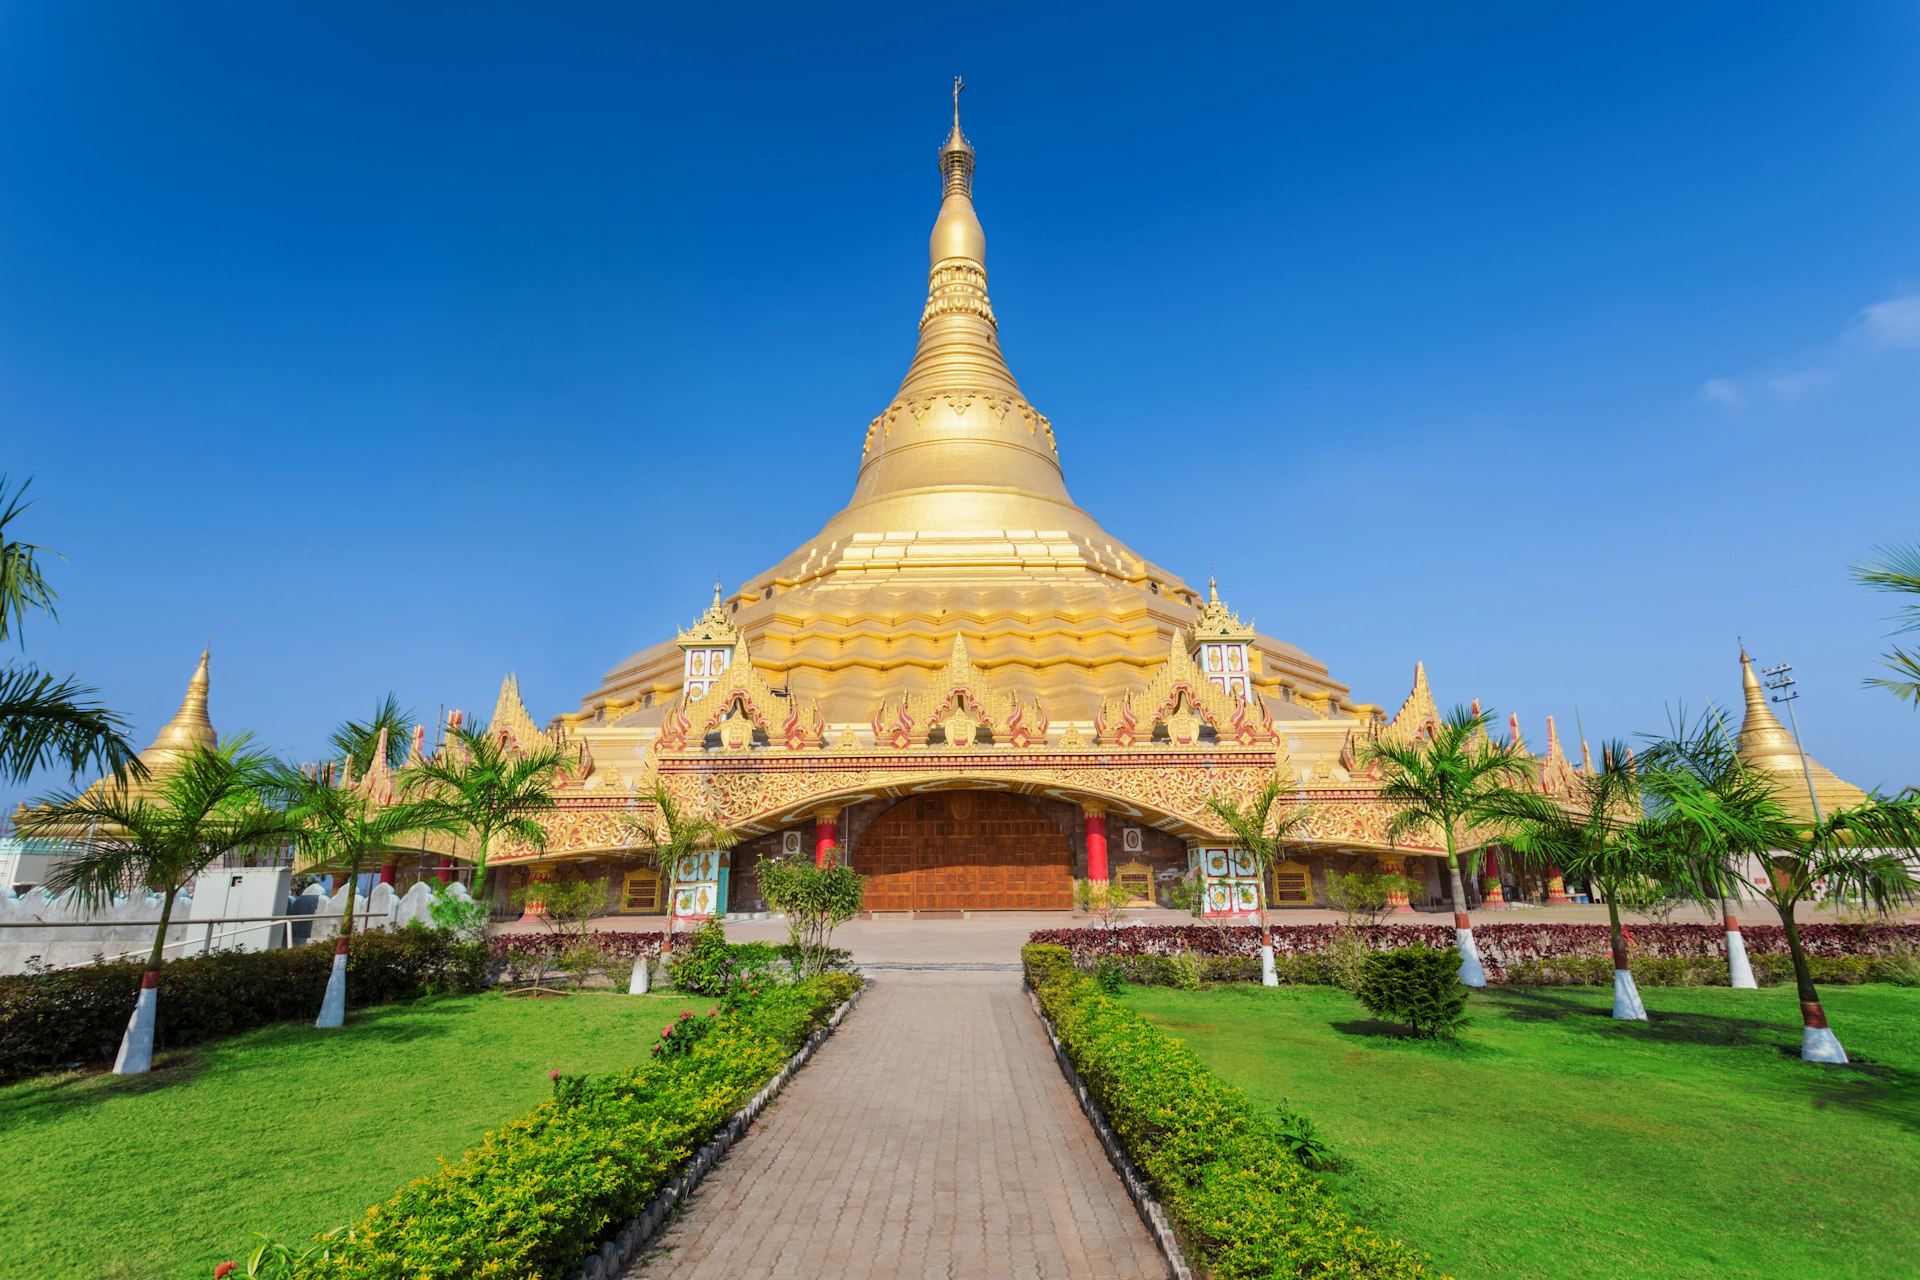 The golden spire of the Global Pagoda in Mumbai 